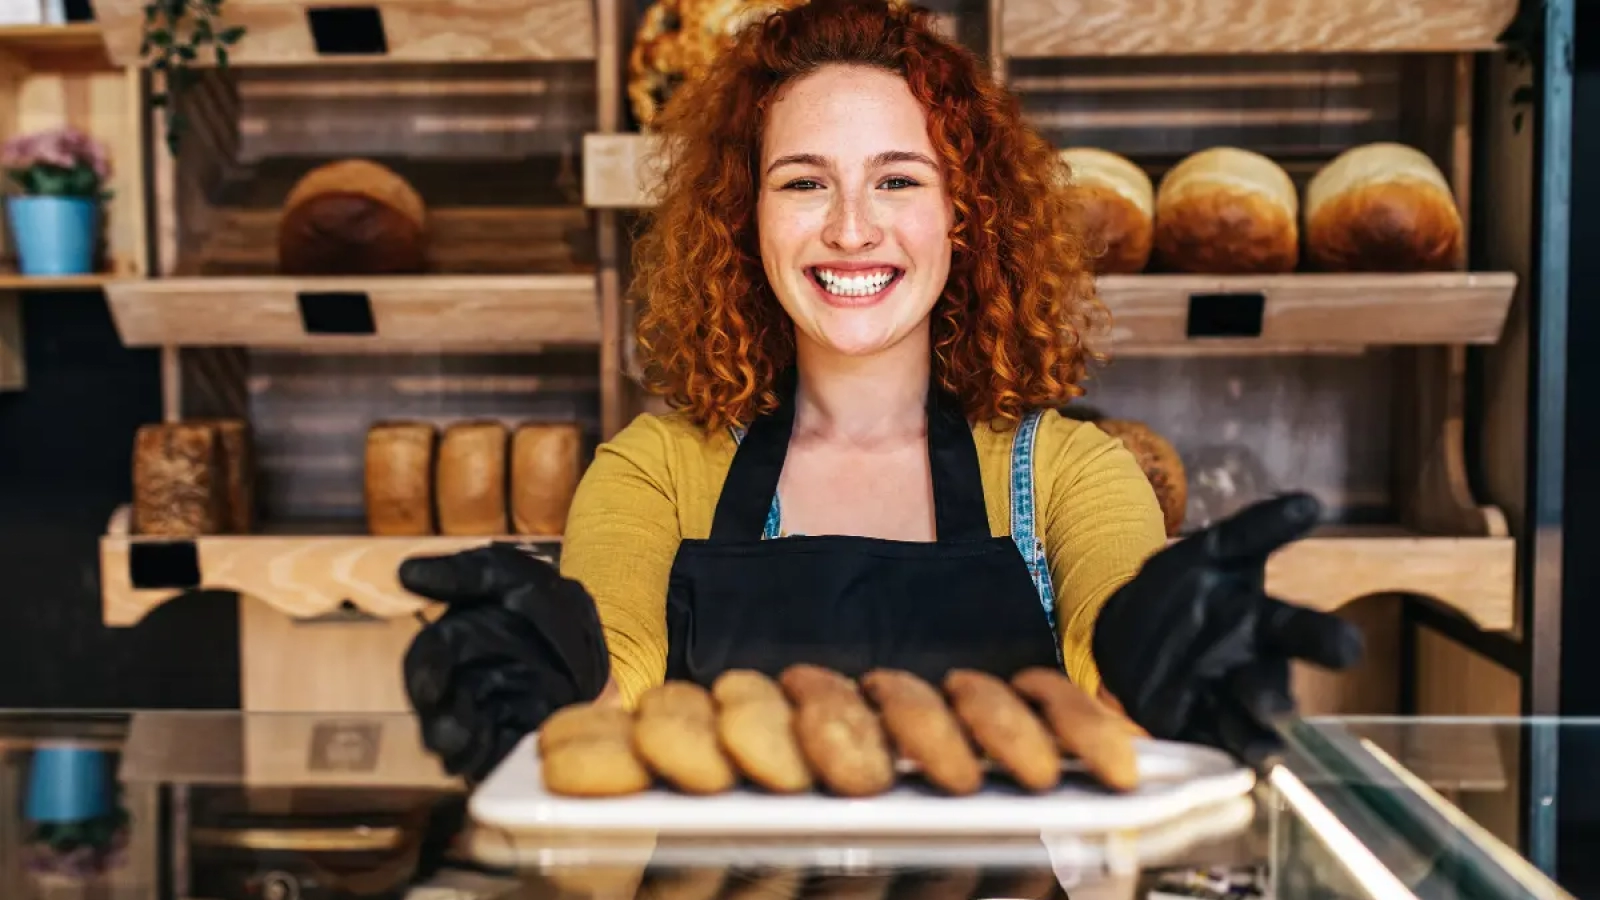 Local SEO Case Study How It Revived a Family Bakery